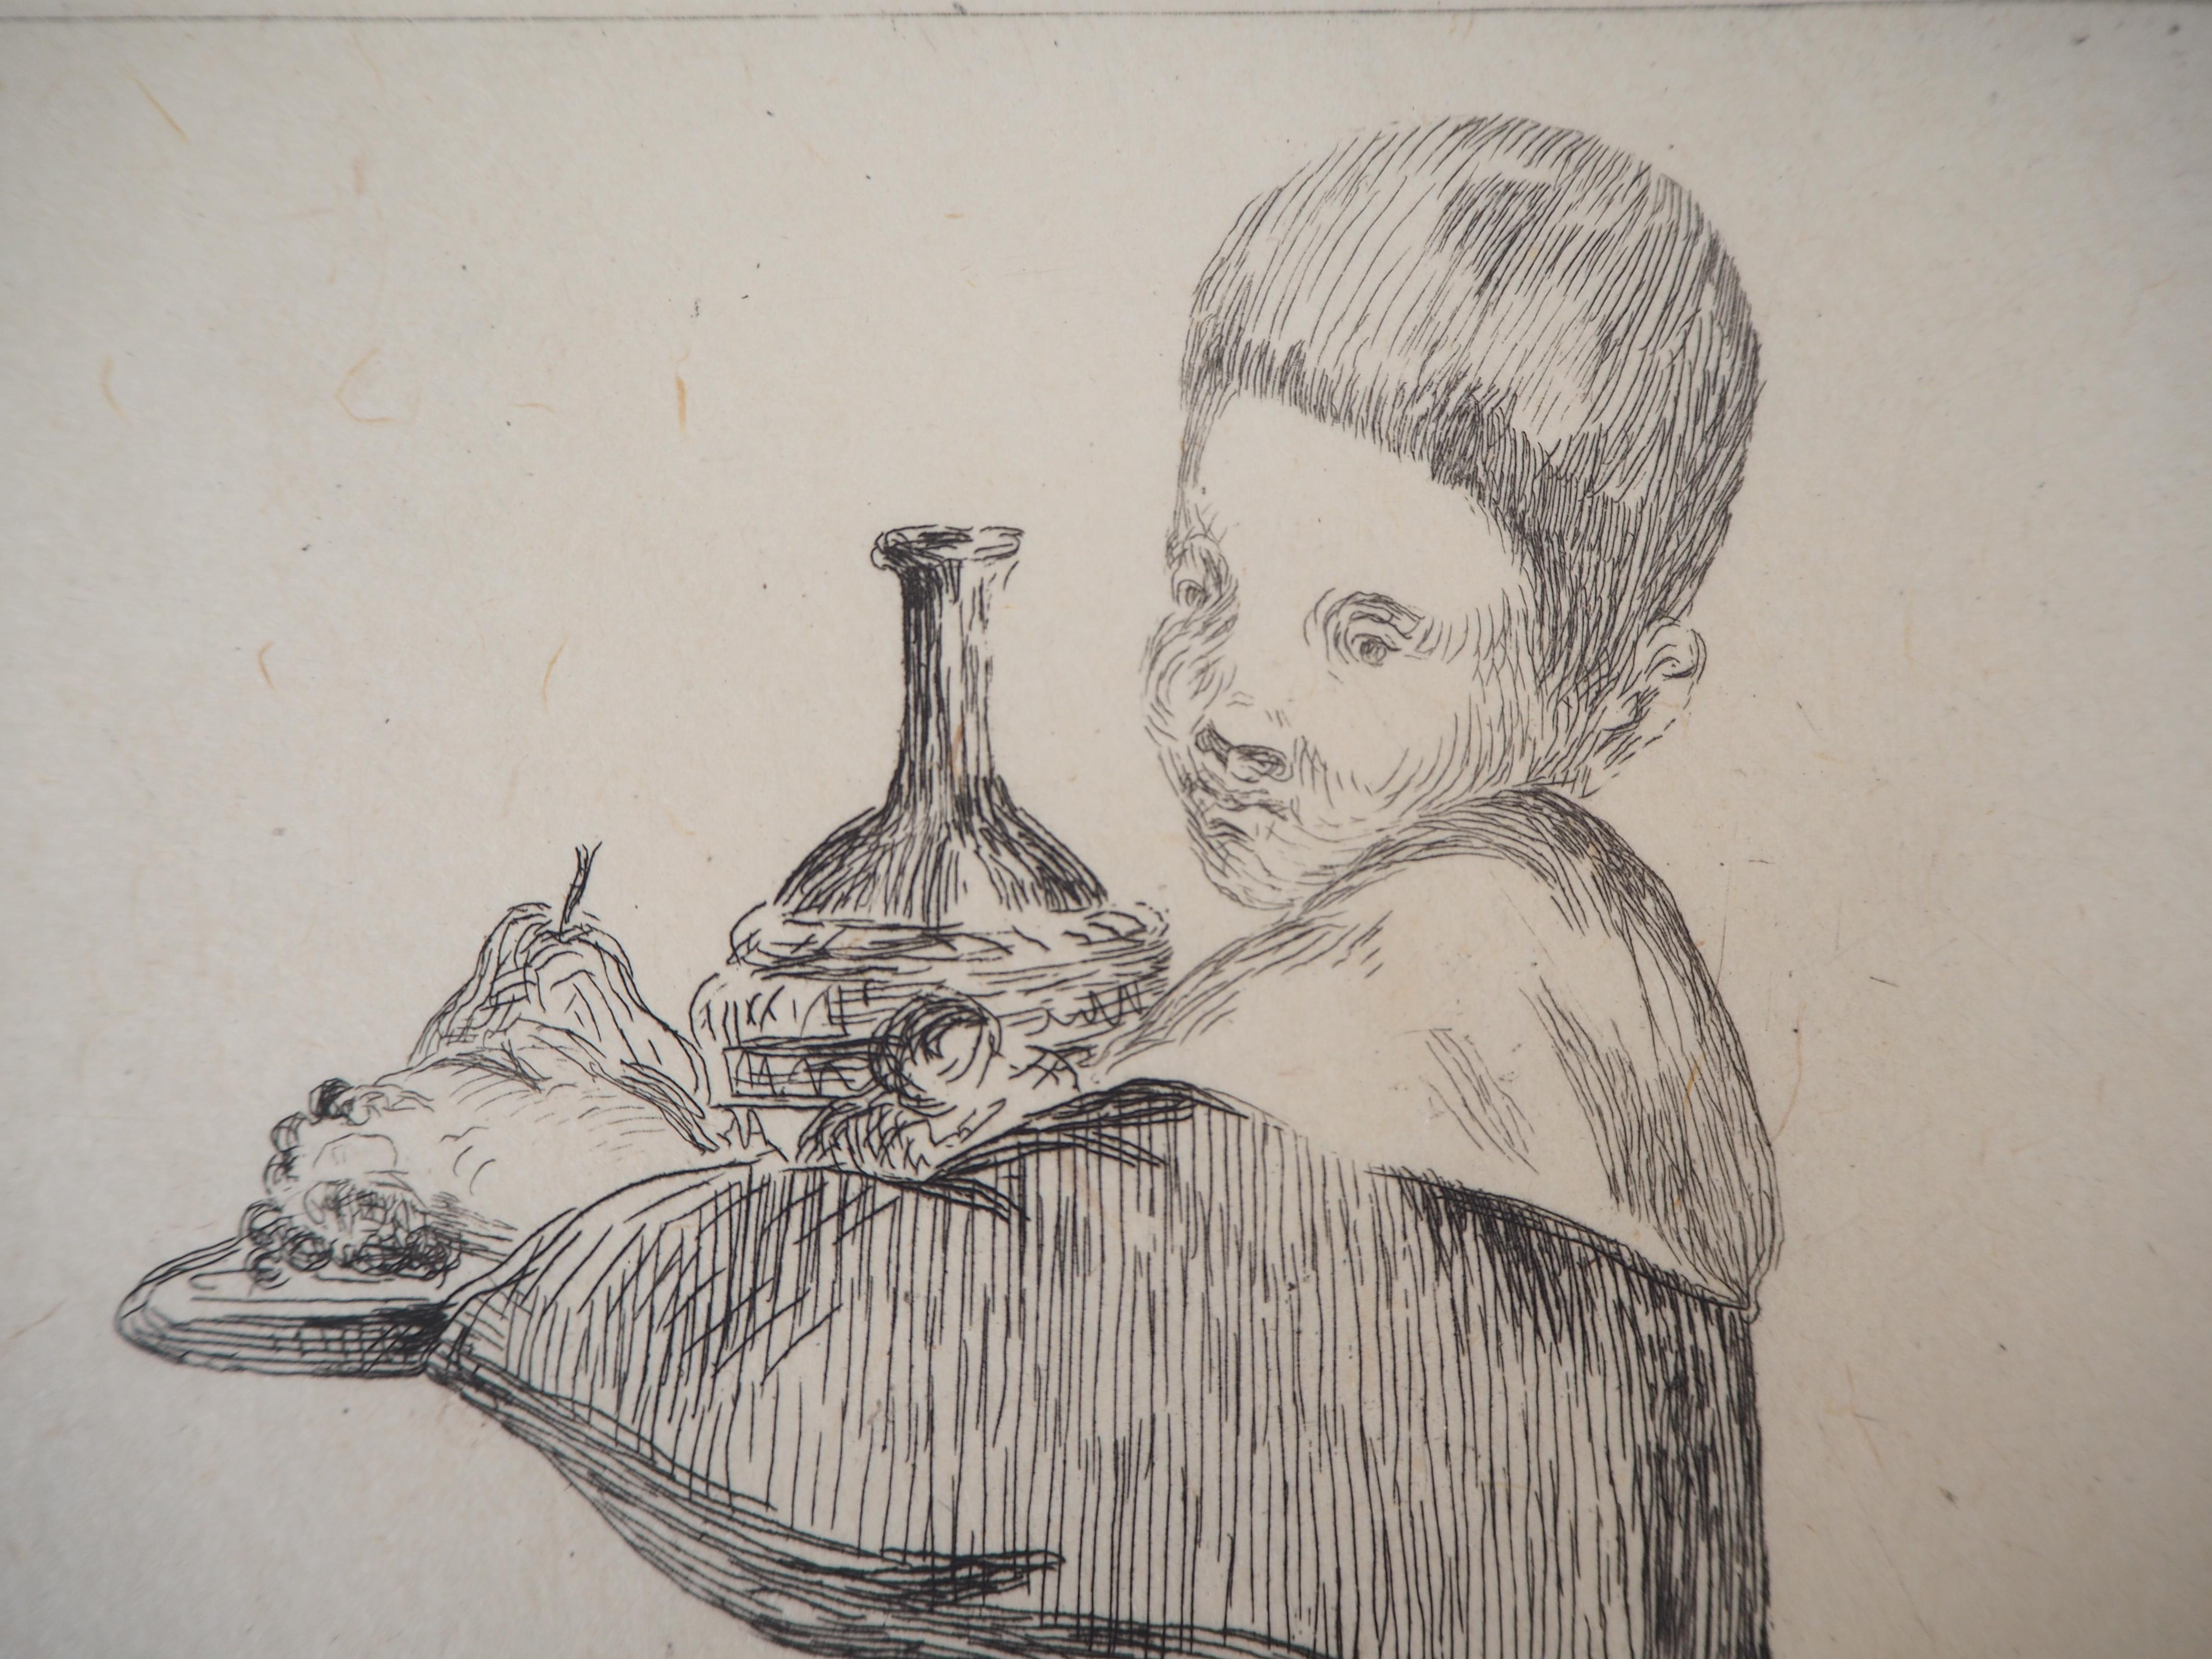 Child with a Tray (Pear and Bottle) - Original Etching (Guerin #15) - Beige Figurative Print by Edouard Manet